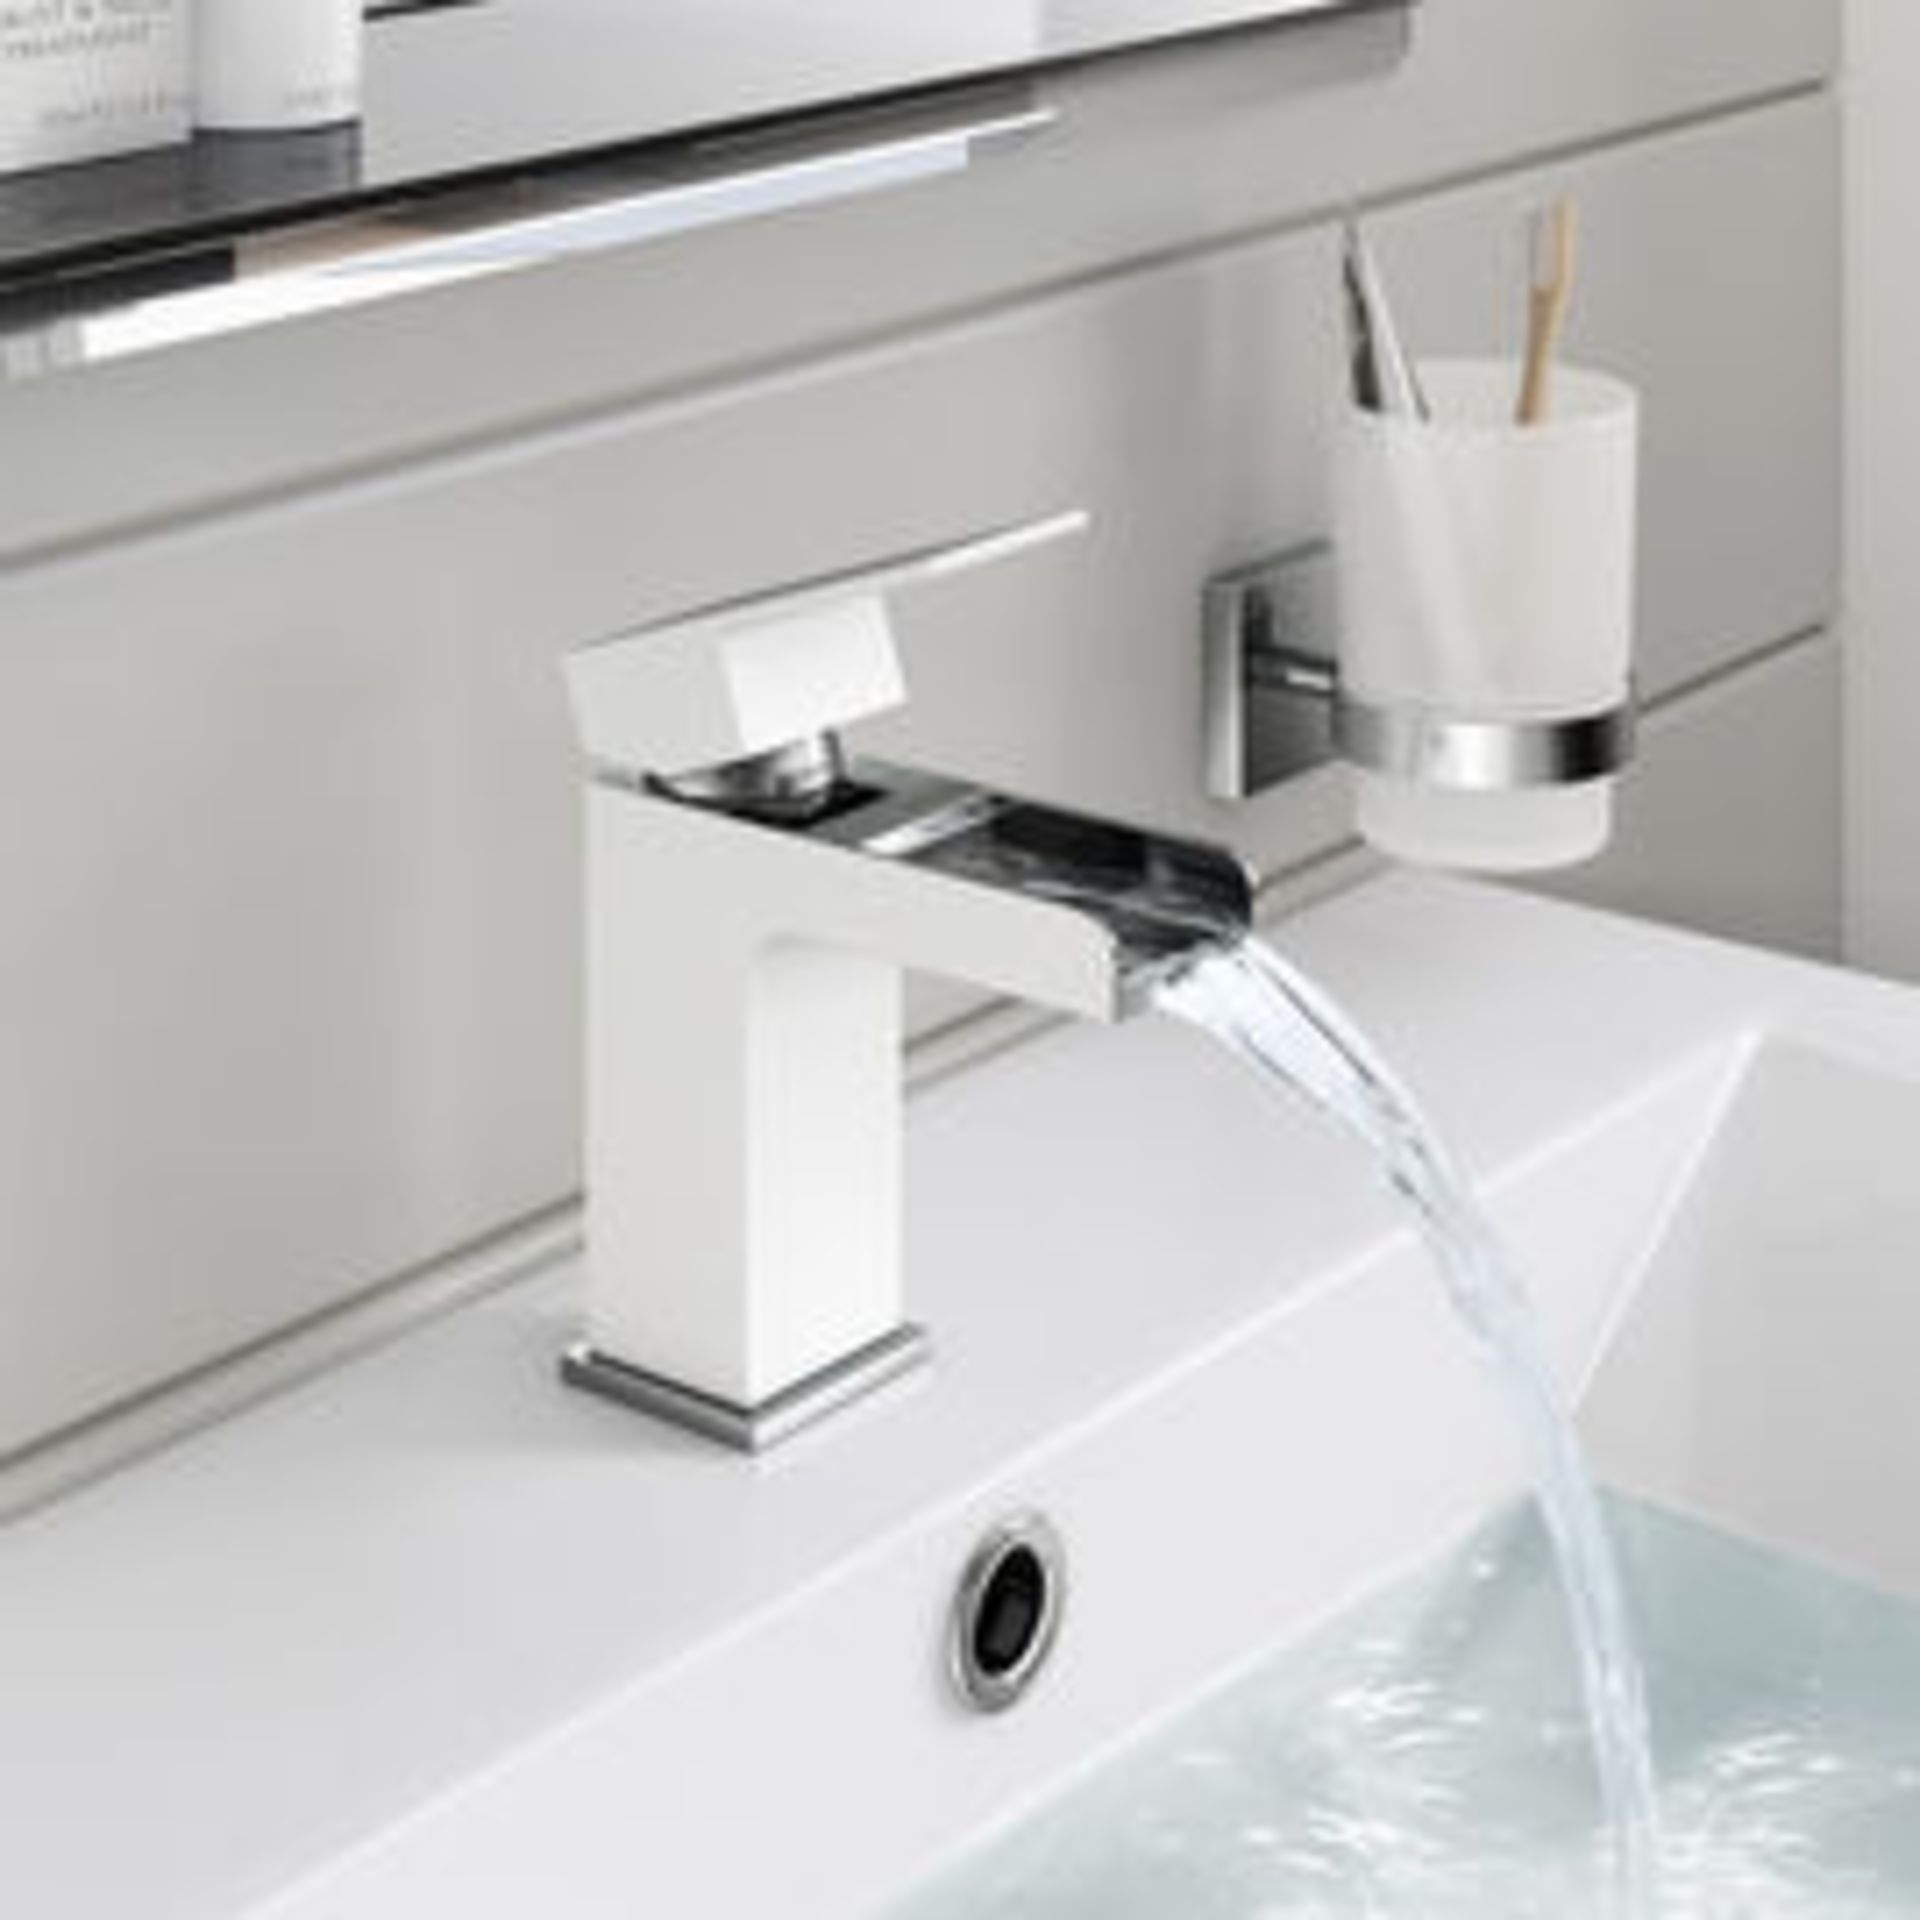 (RK1018) White Niagra II Sink Mixer Tap Includes drip free ceramic disc technology and a mixer... - Image 2 of 2